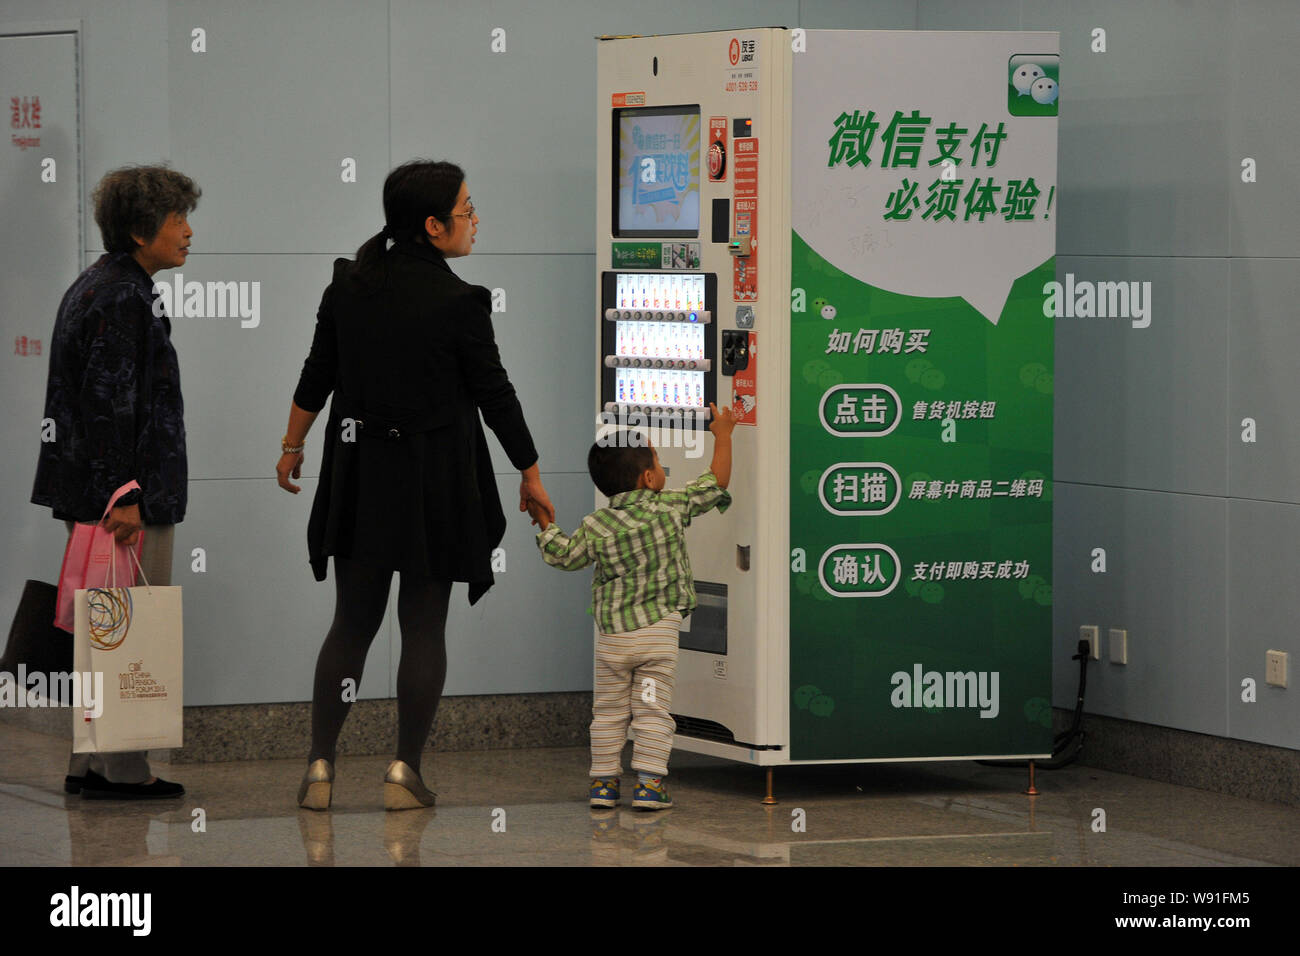 Chinese customers buy bottled drinks on a vending machine within the Wechat app in a subway station in Beijing, China, 26 September 2013.   WeChat use Stock Photo